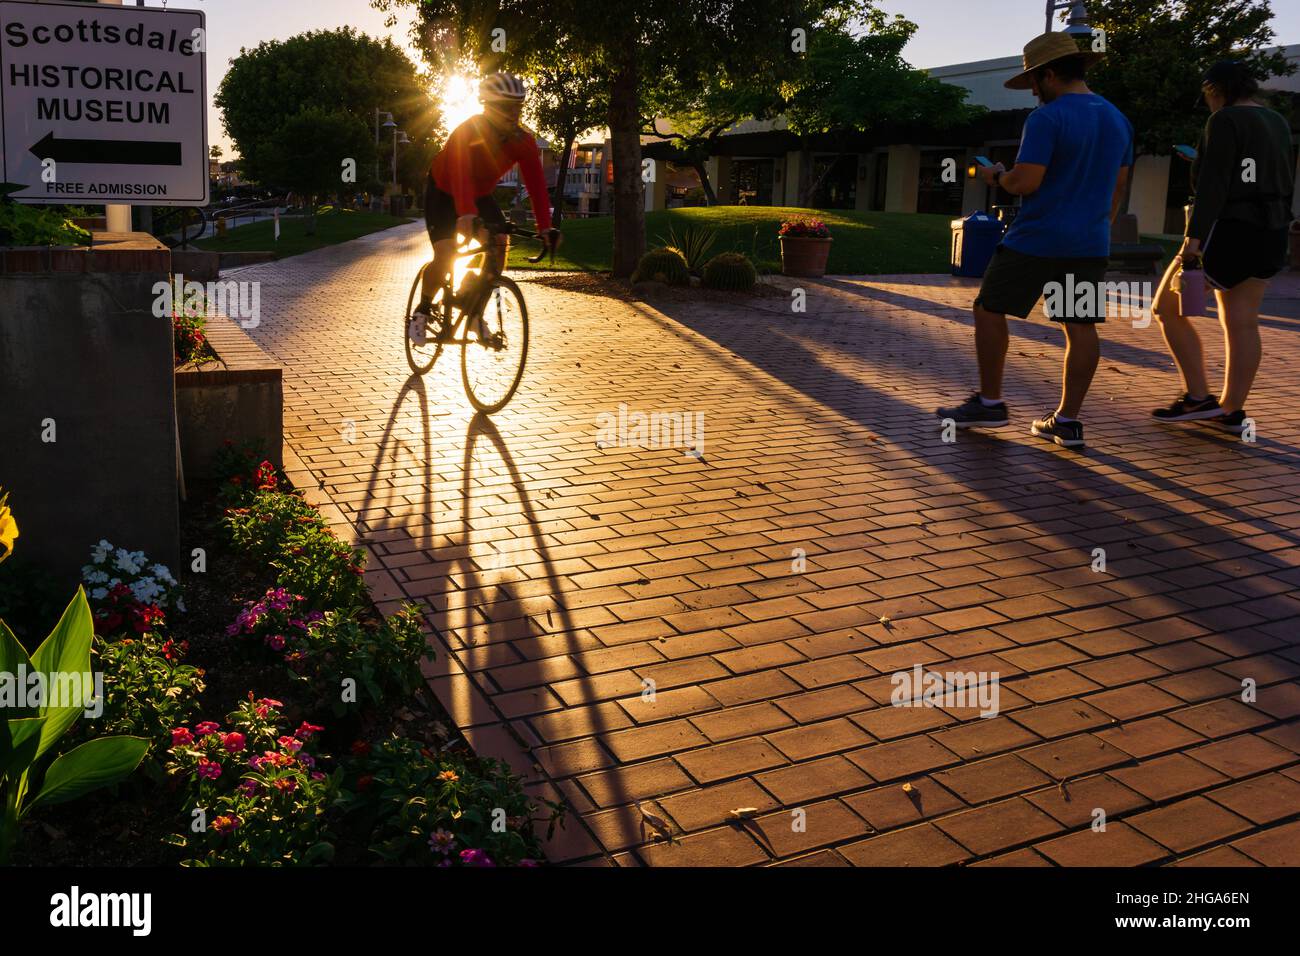 A male bicyclist riding a bicycle towards the Scottsdale Civic Center in Old Town Scottsdale, Arizona, United States. Stock Photo